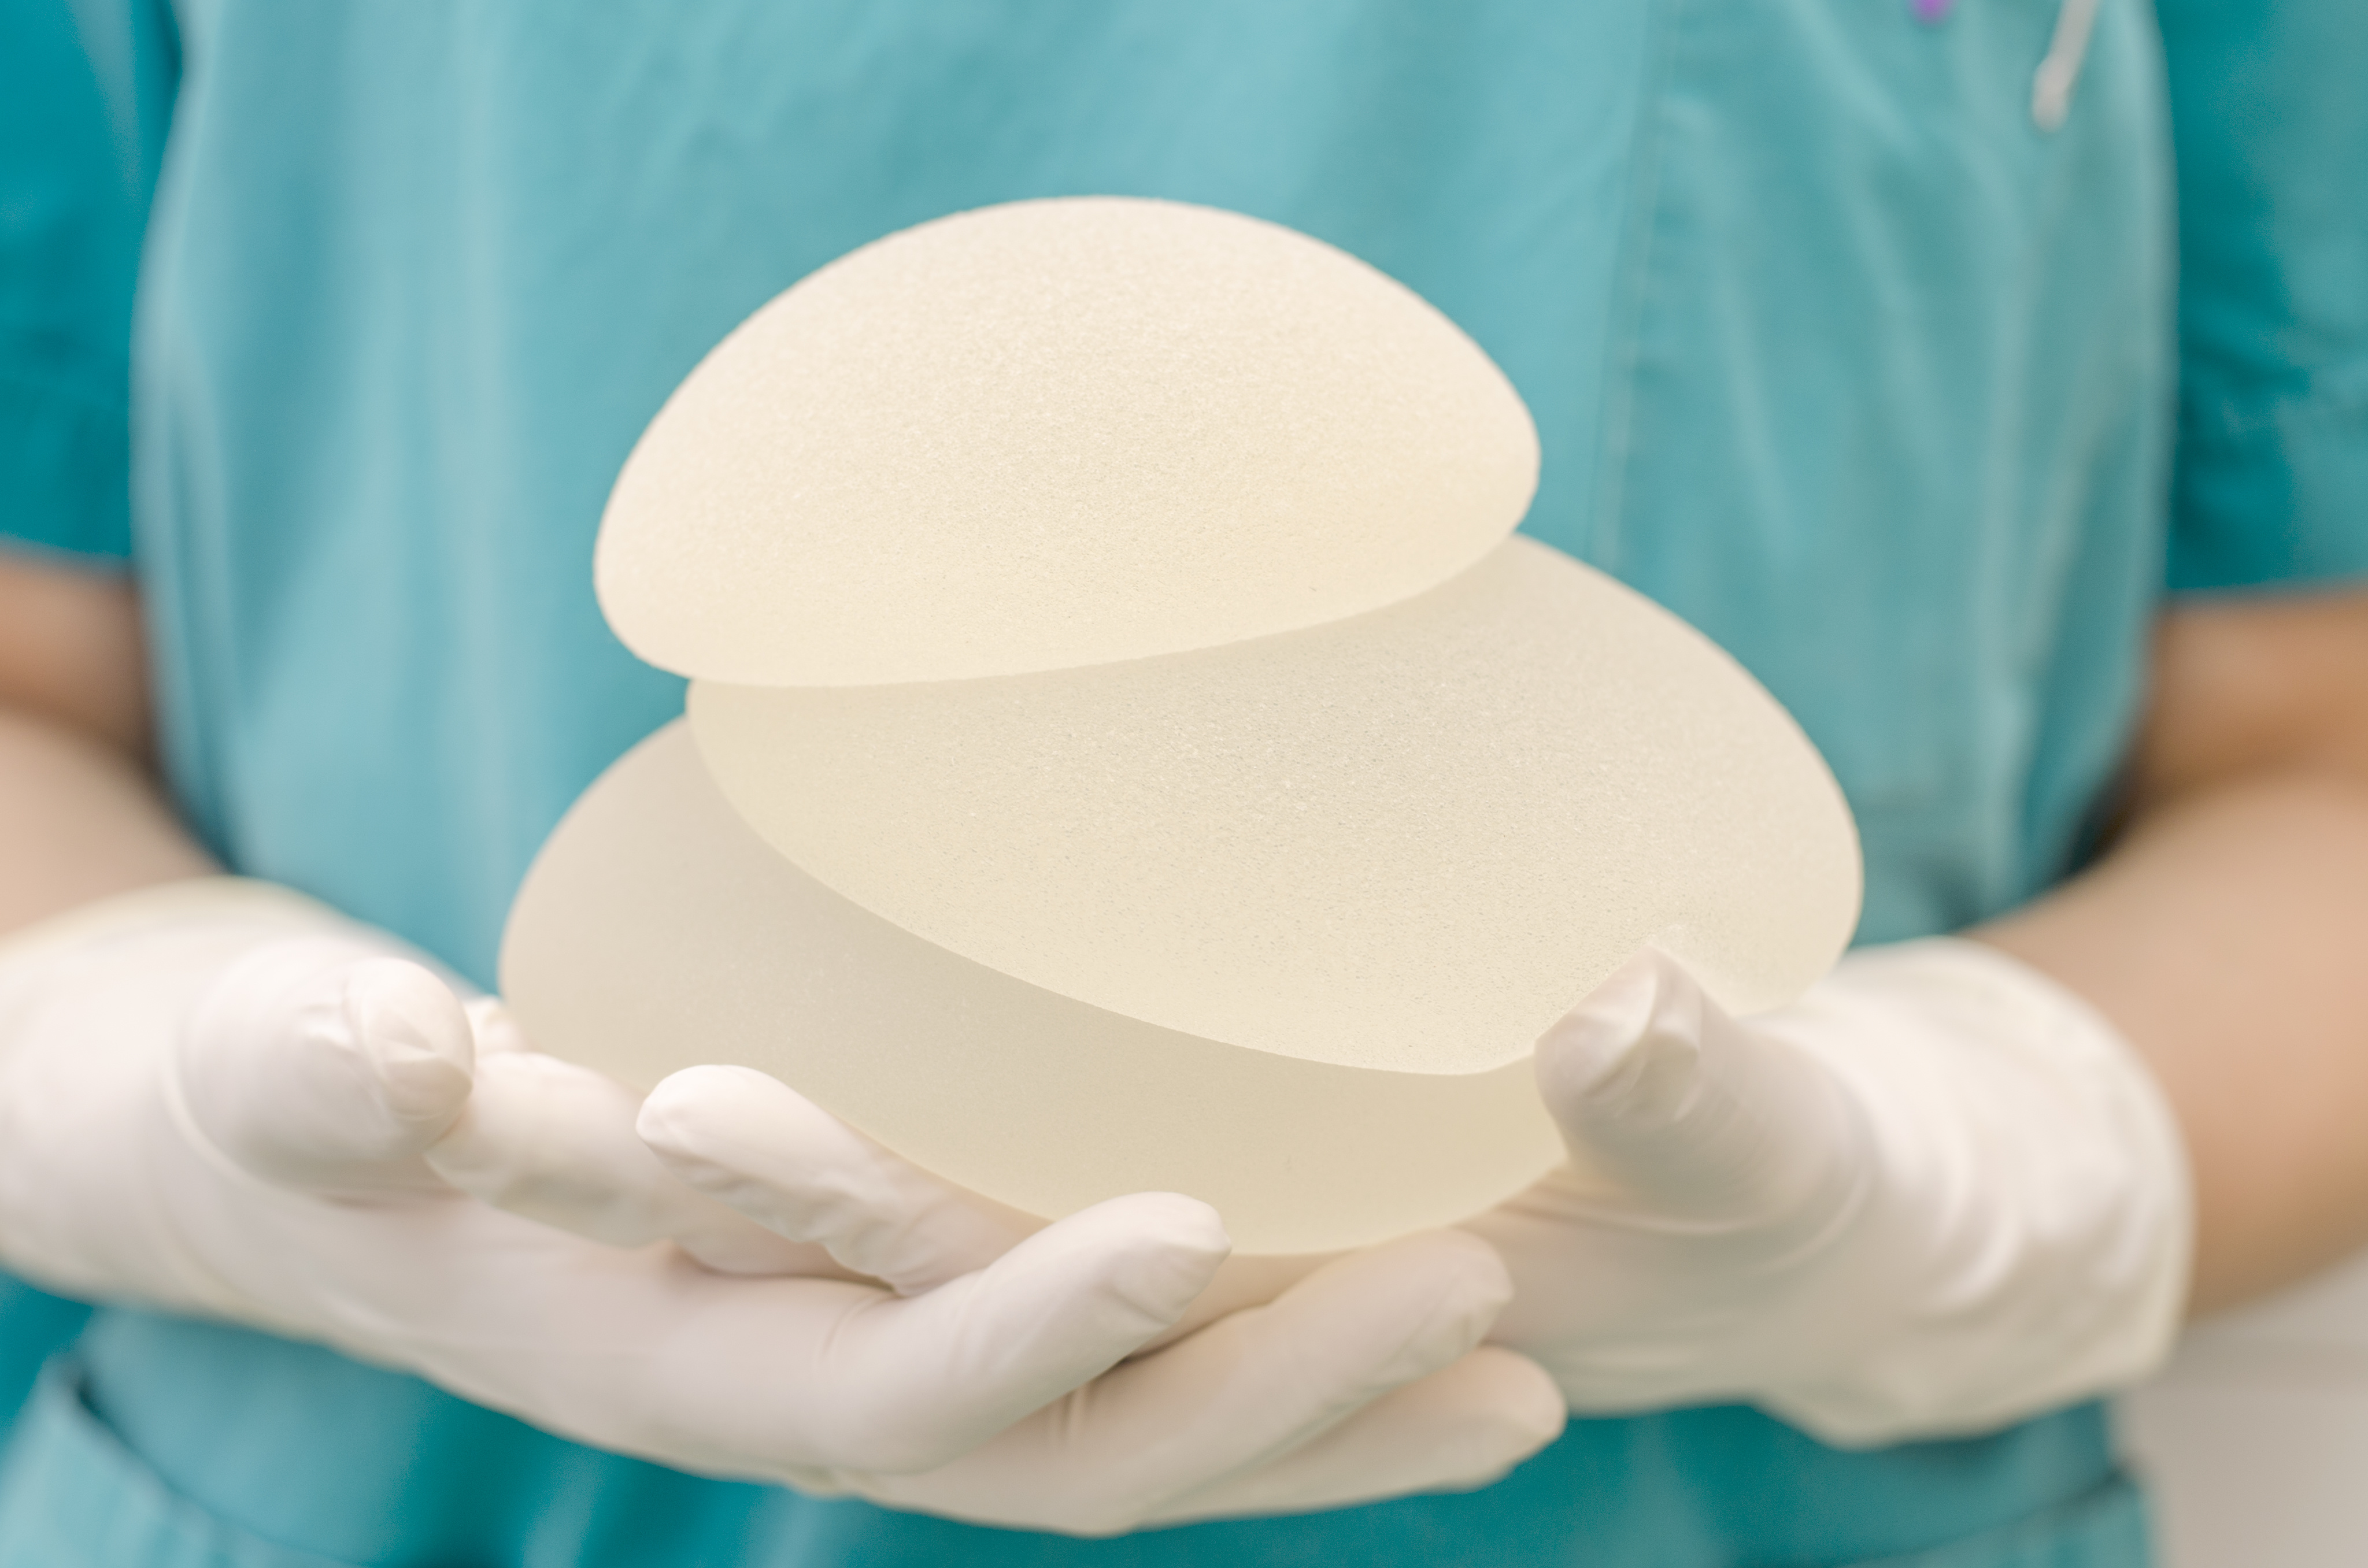 Breast Implant Illness: What You Need To Know